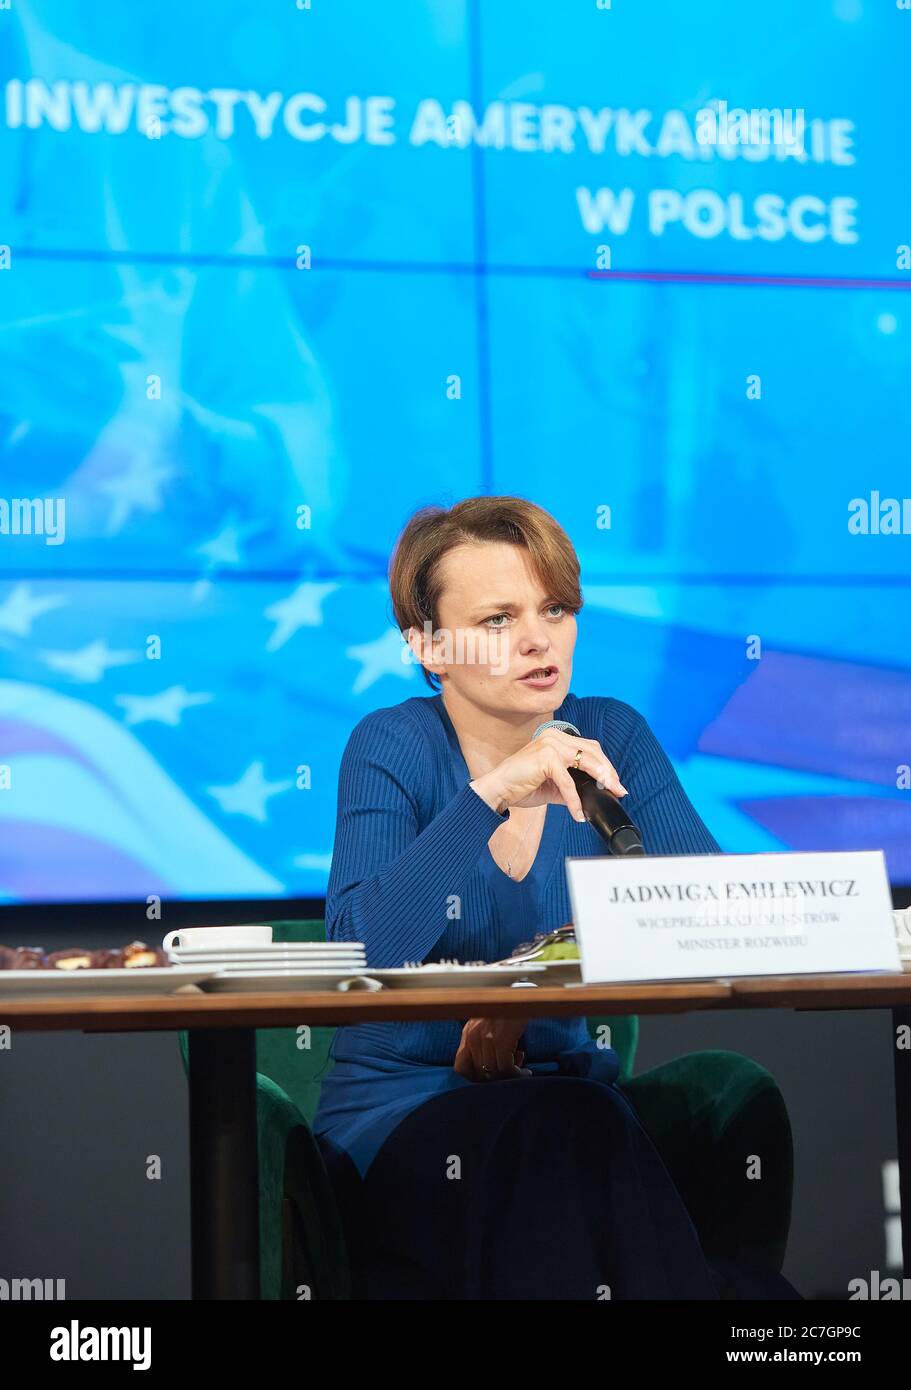 Warsaw, Mazovian, Poland. 17th July, 2020. Press Meeting Summarizing American Investments in Poland in Recent Years.in the picture: JADWIGA EMILEWICZ Credit: Hubert Mathis/ZUMA Wire/Alamy Live News Stock Photo